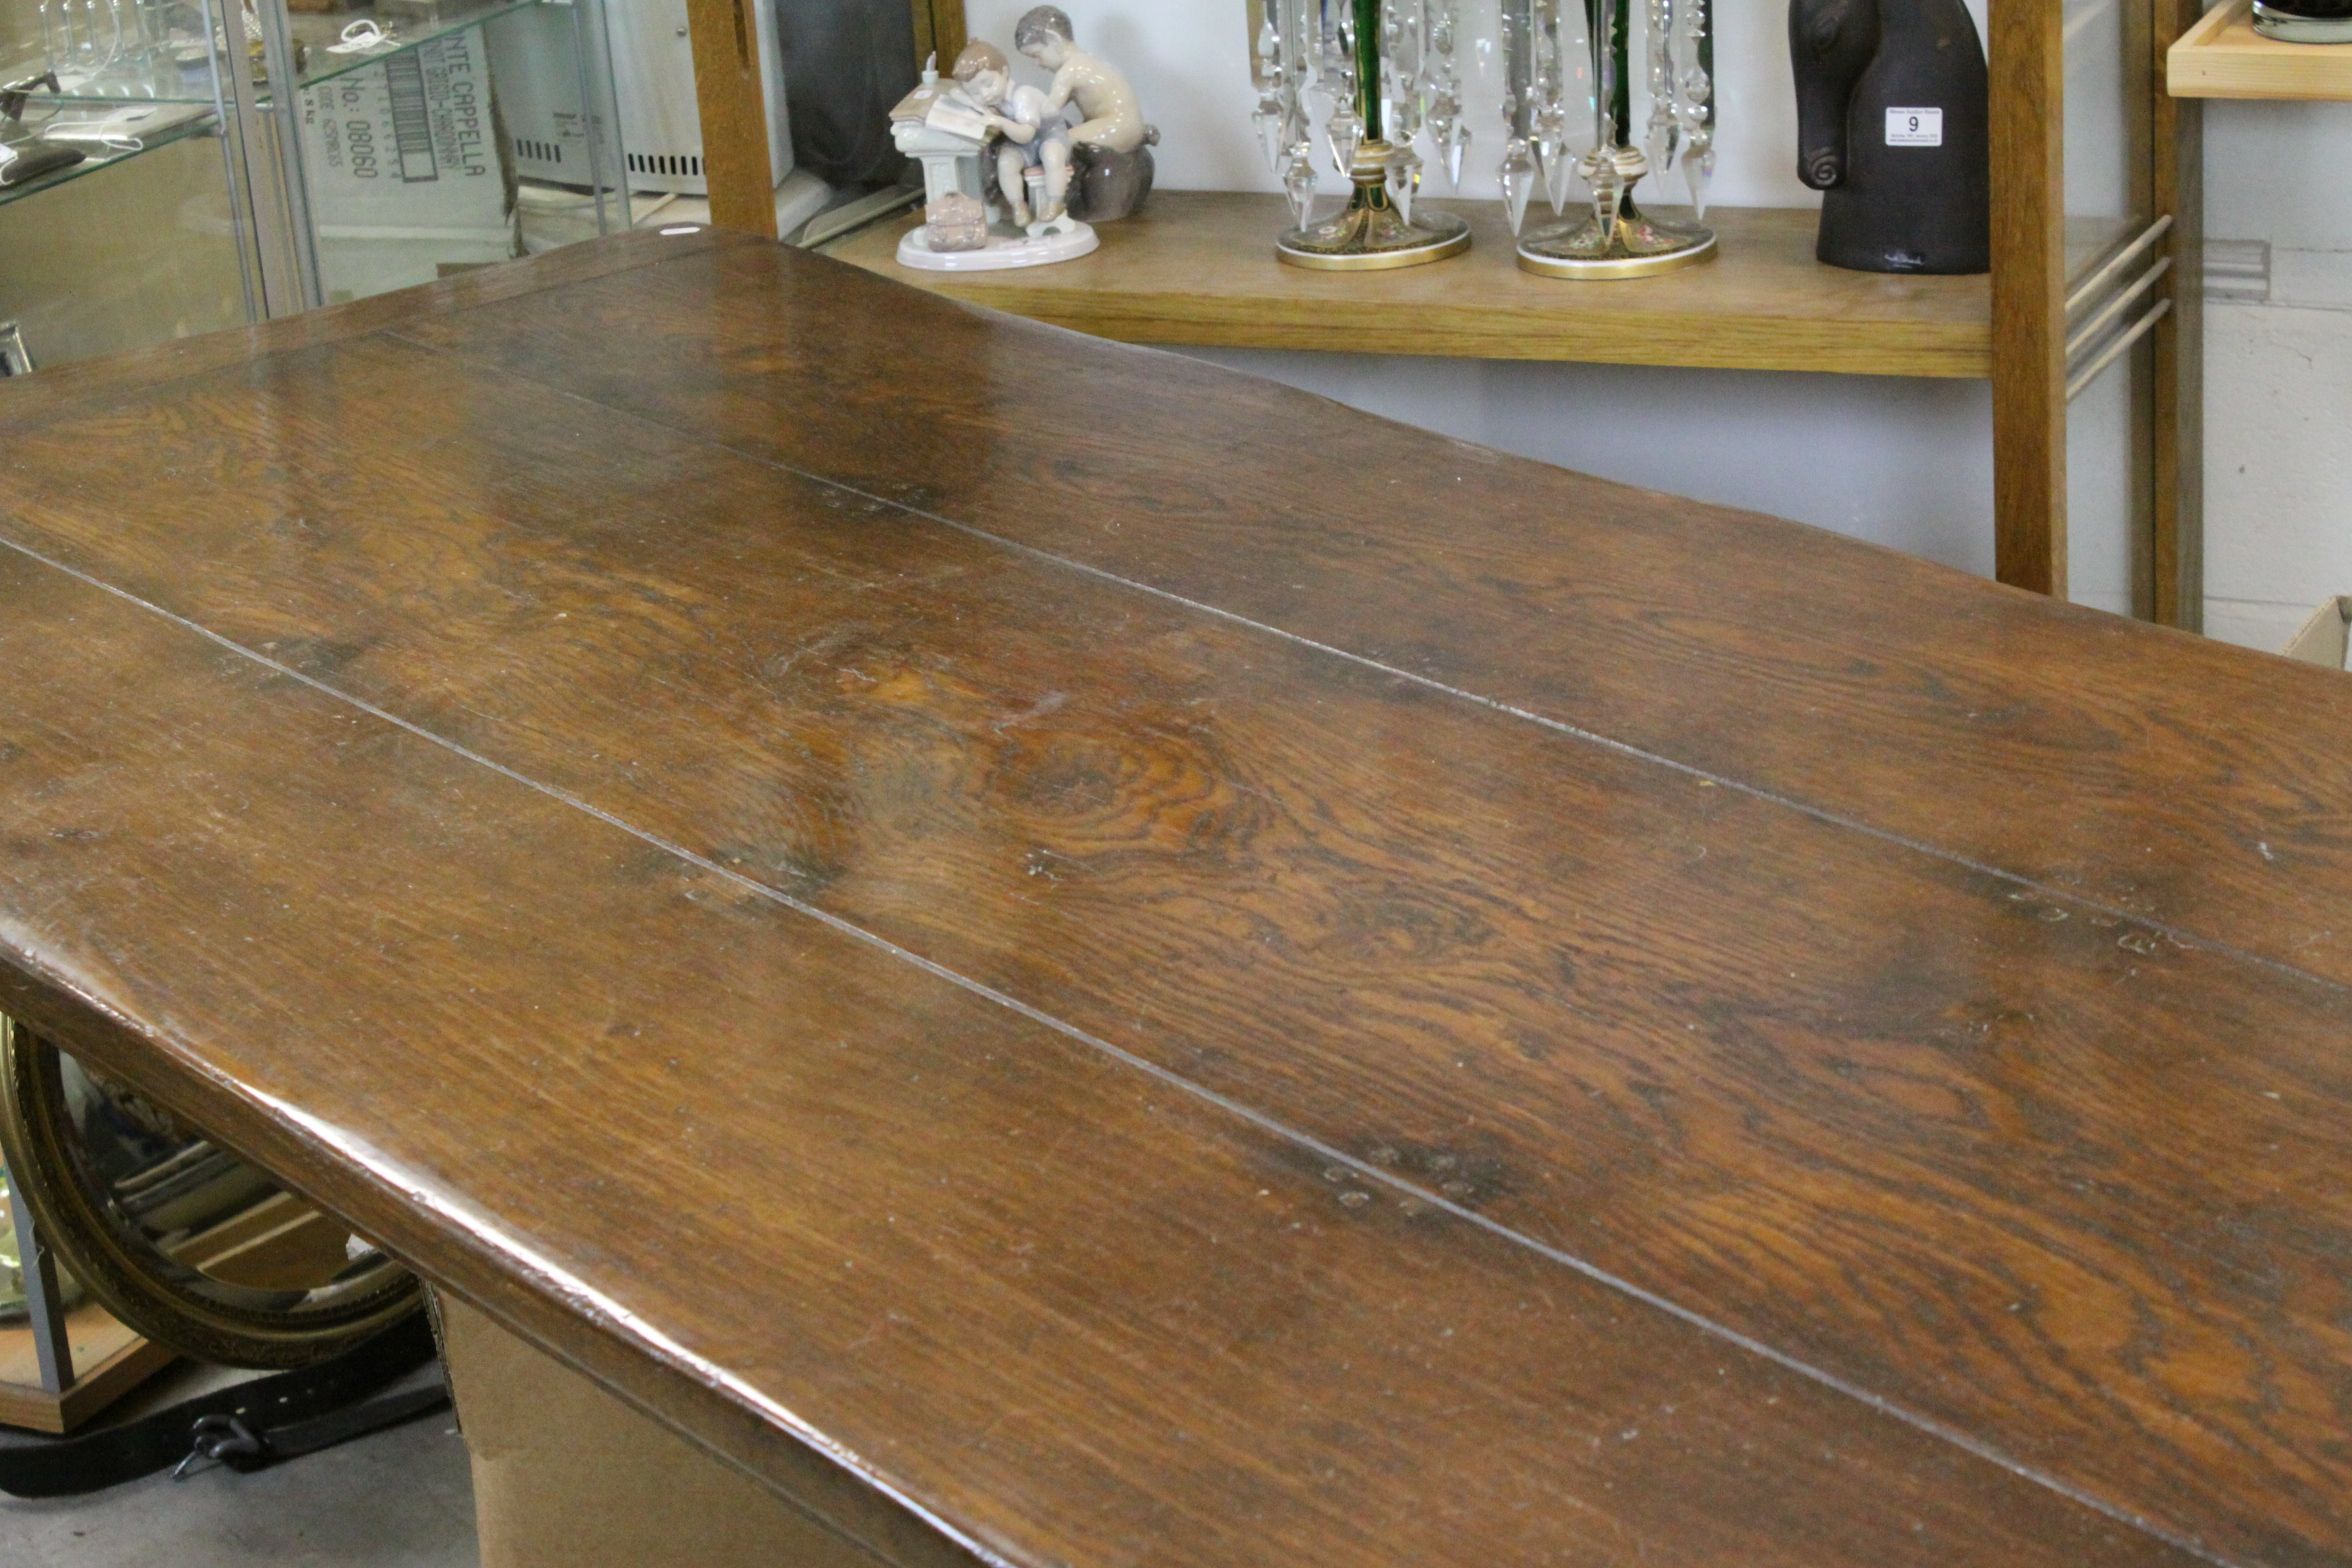 Oak Plank Top Dining Table raised on Square Legs, 213cms x 91cms x 77cms high - Image 3 of 5